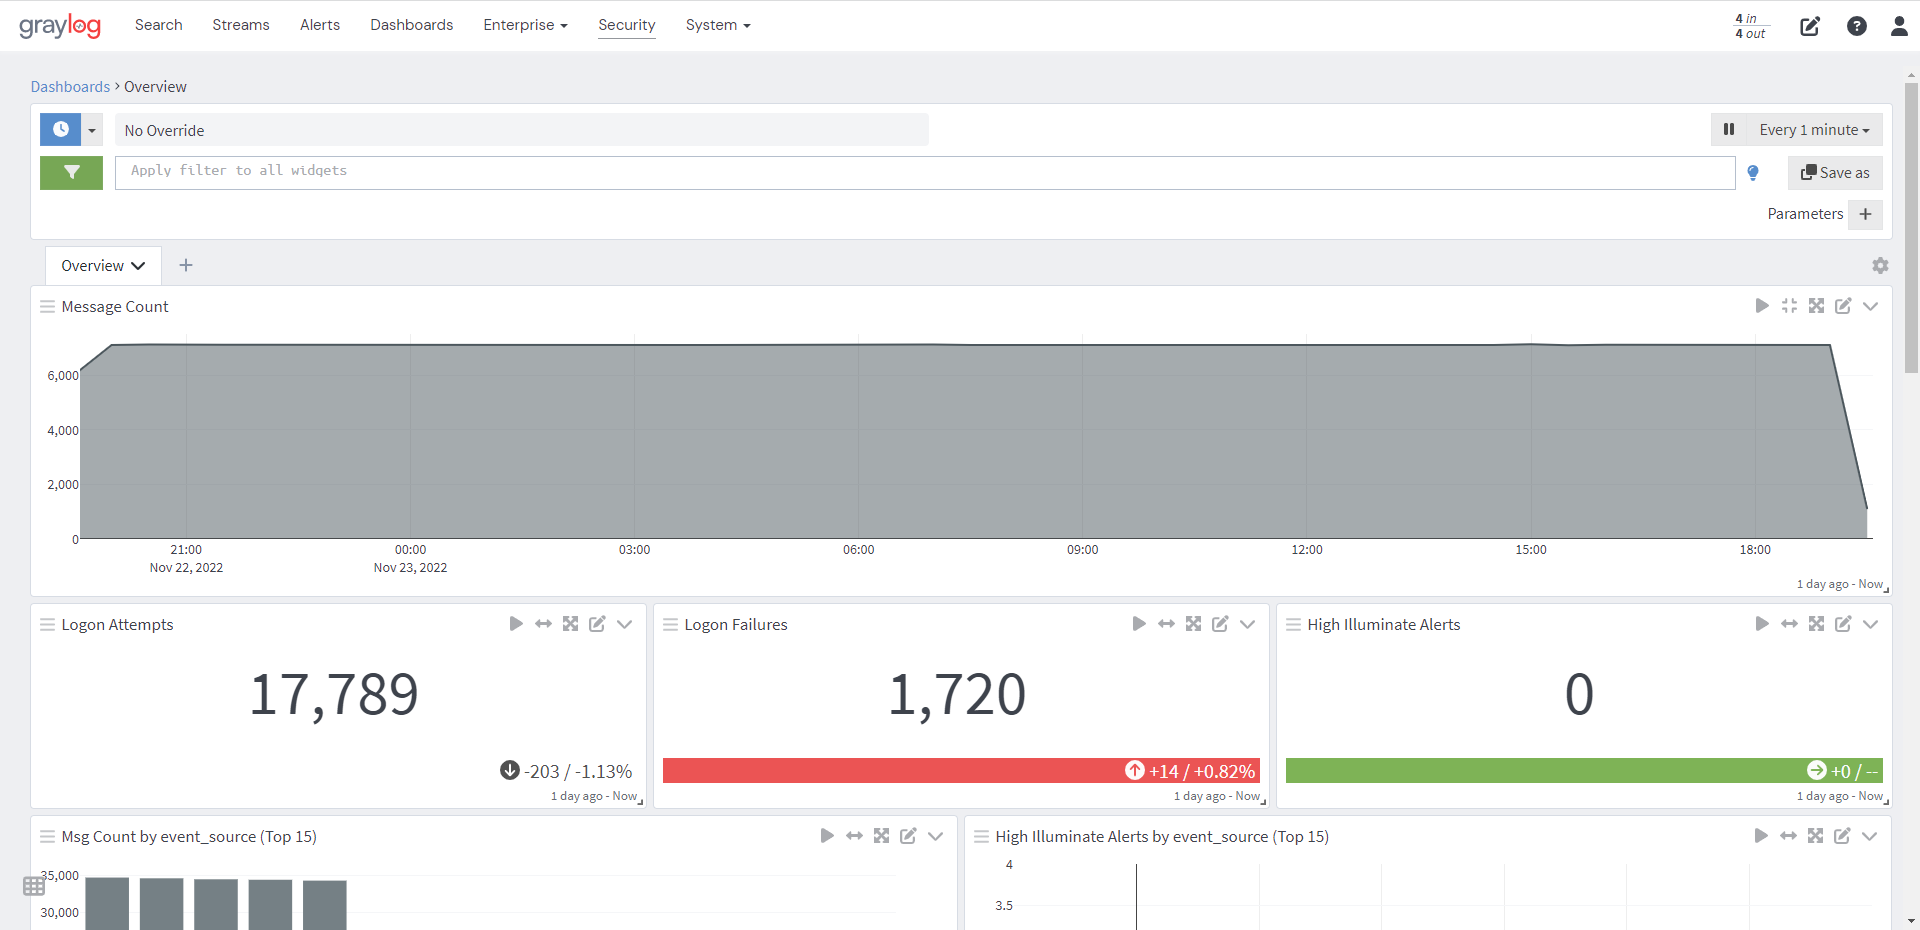 Graylog dashboard widgets overview for your application